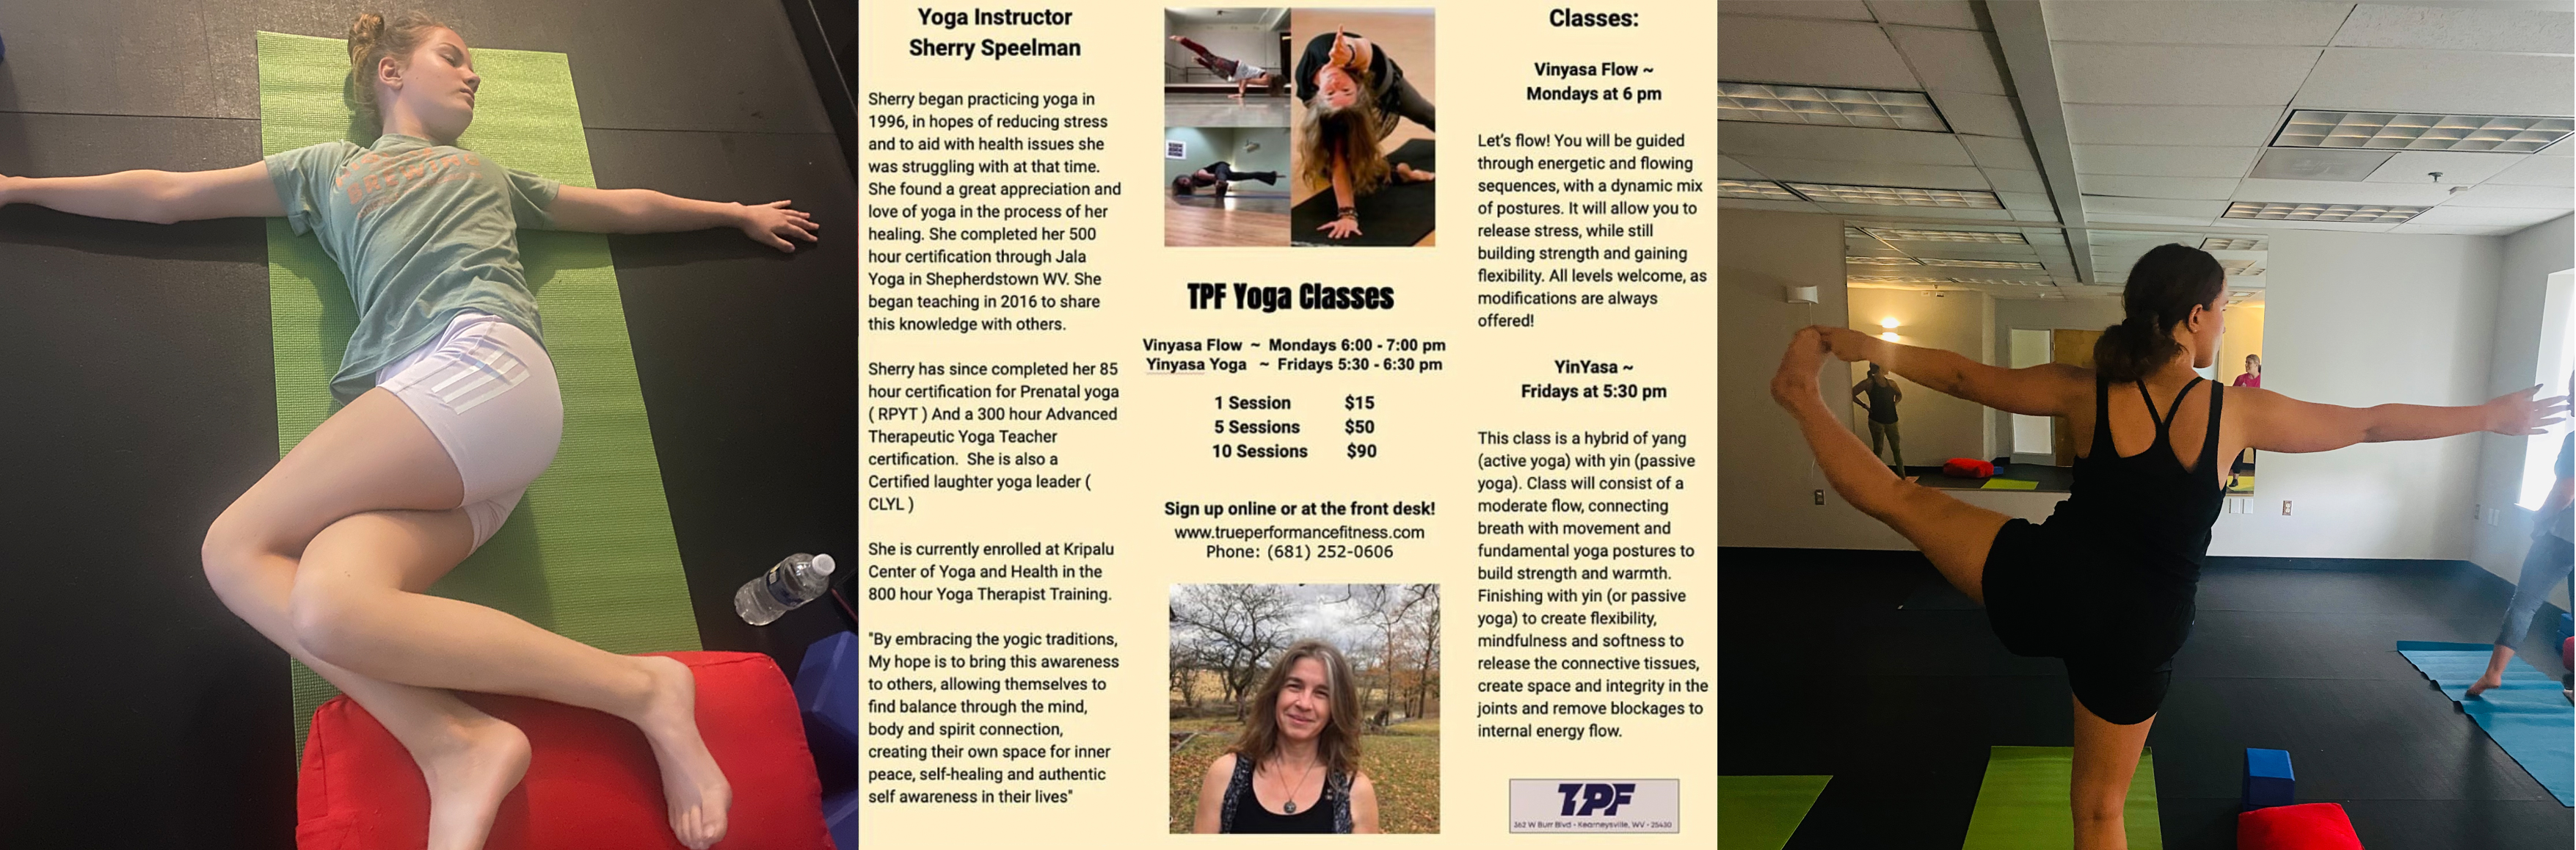 Yoga classes Mondays at 6pm and Fridays at 5:30pm, taught by Sherry Speelman